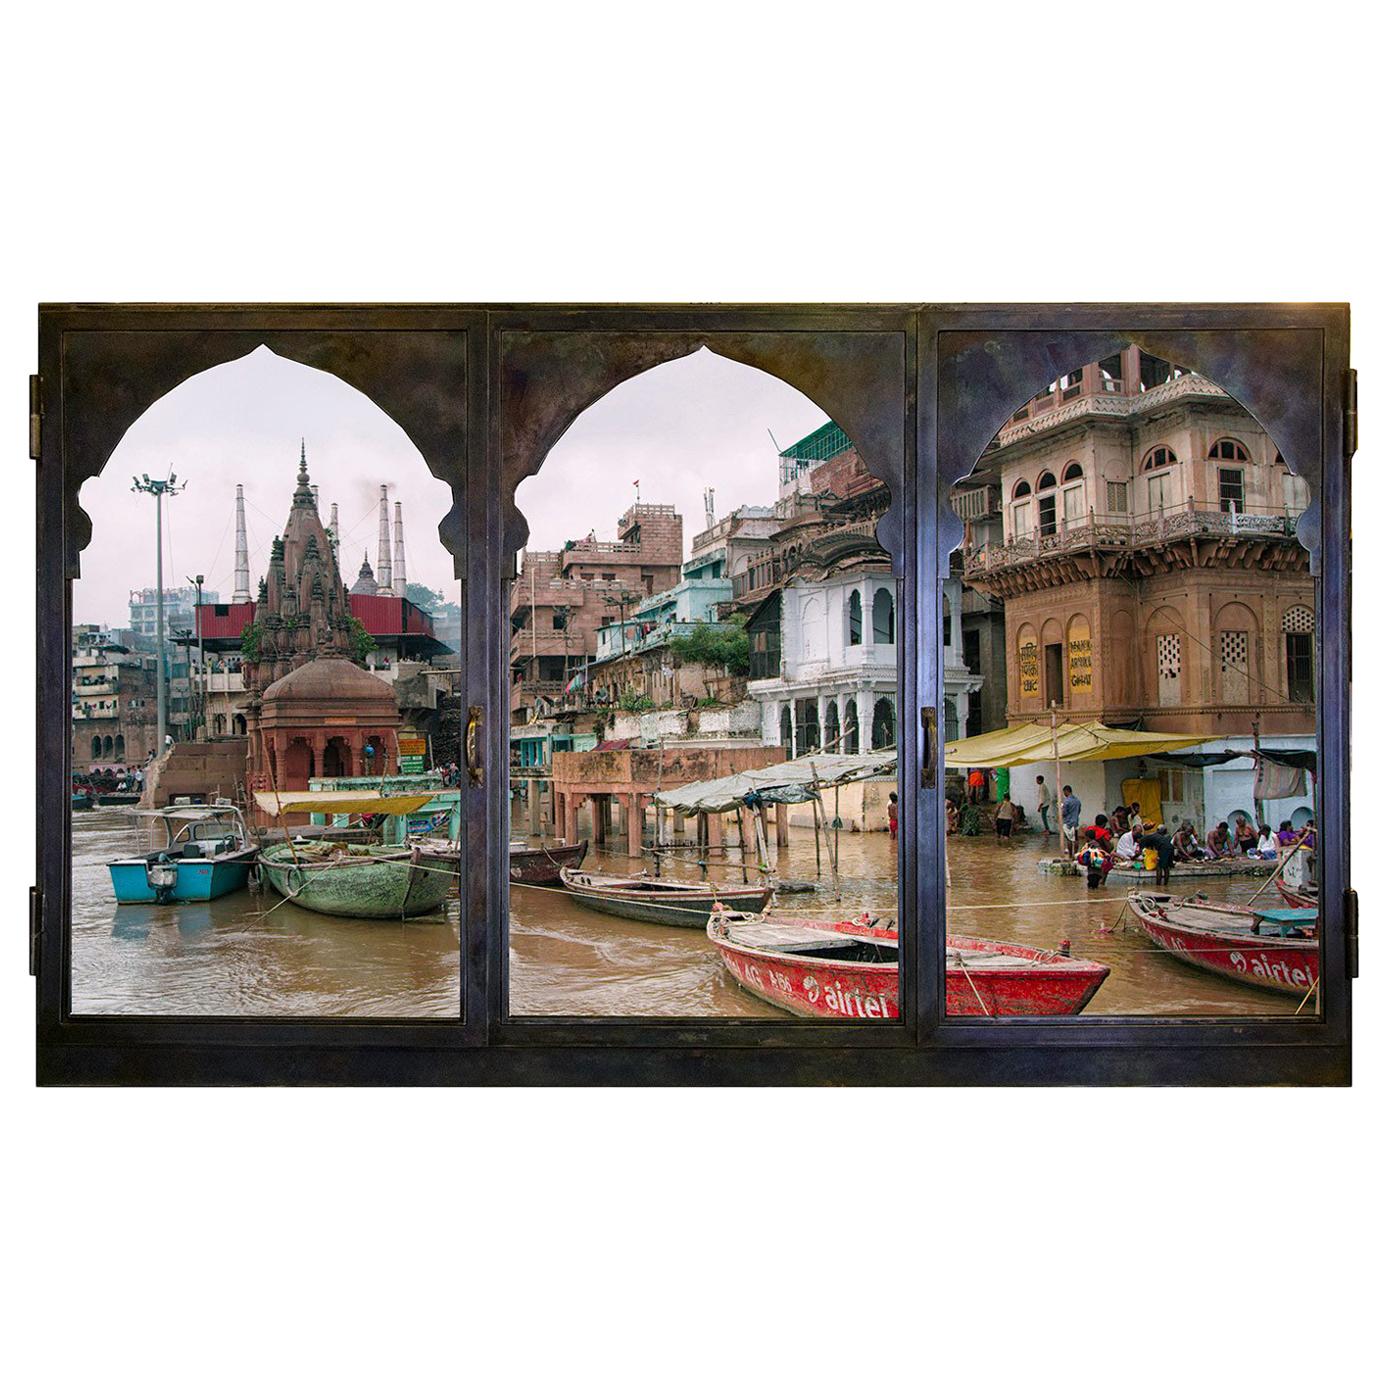 Anotherview n.14 On the Ganges During Monsoon For Sale